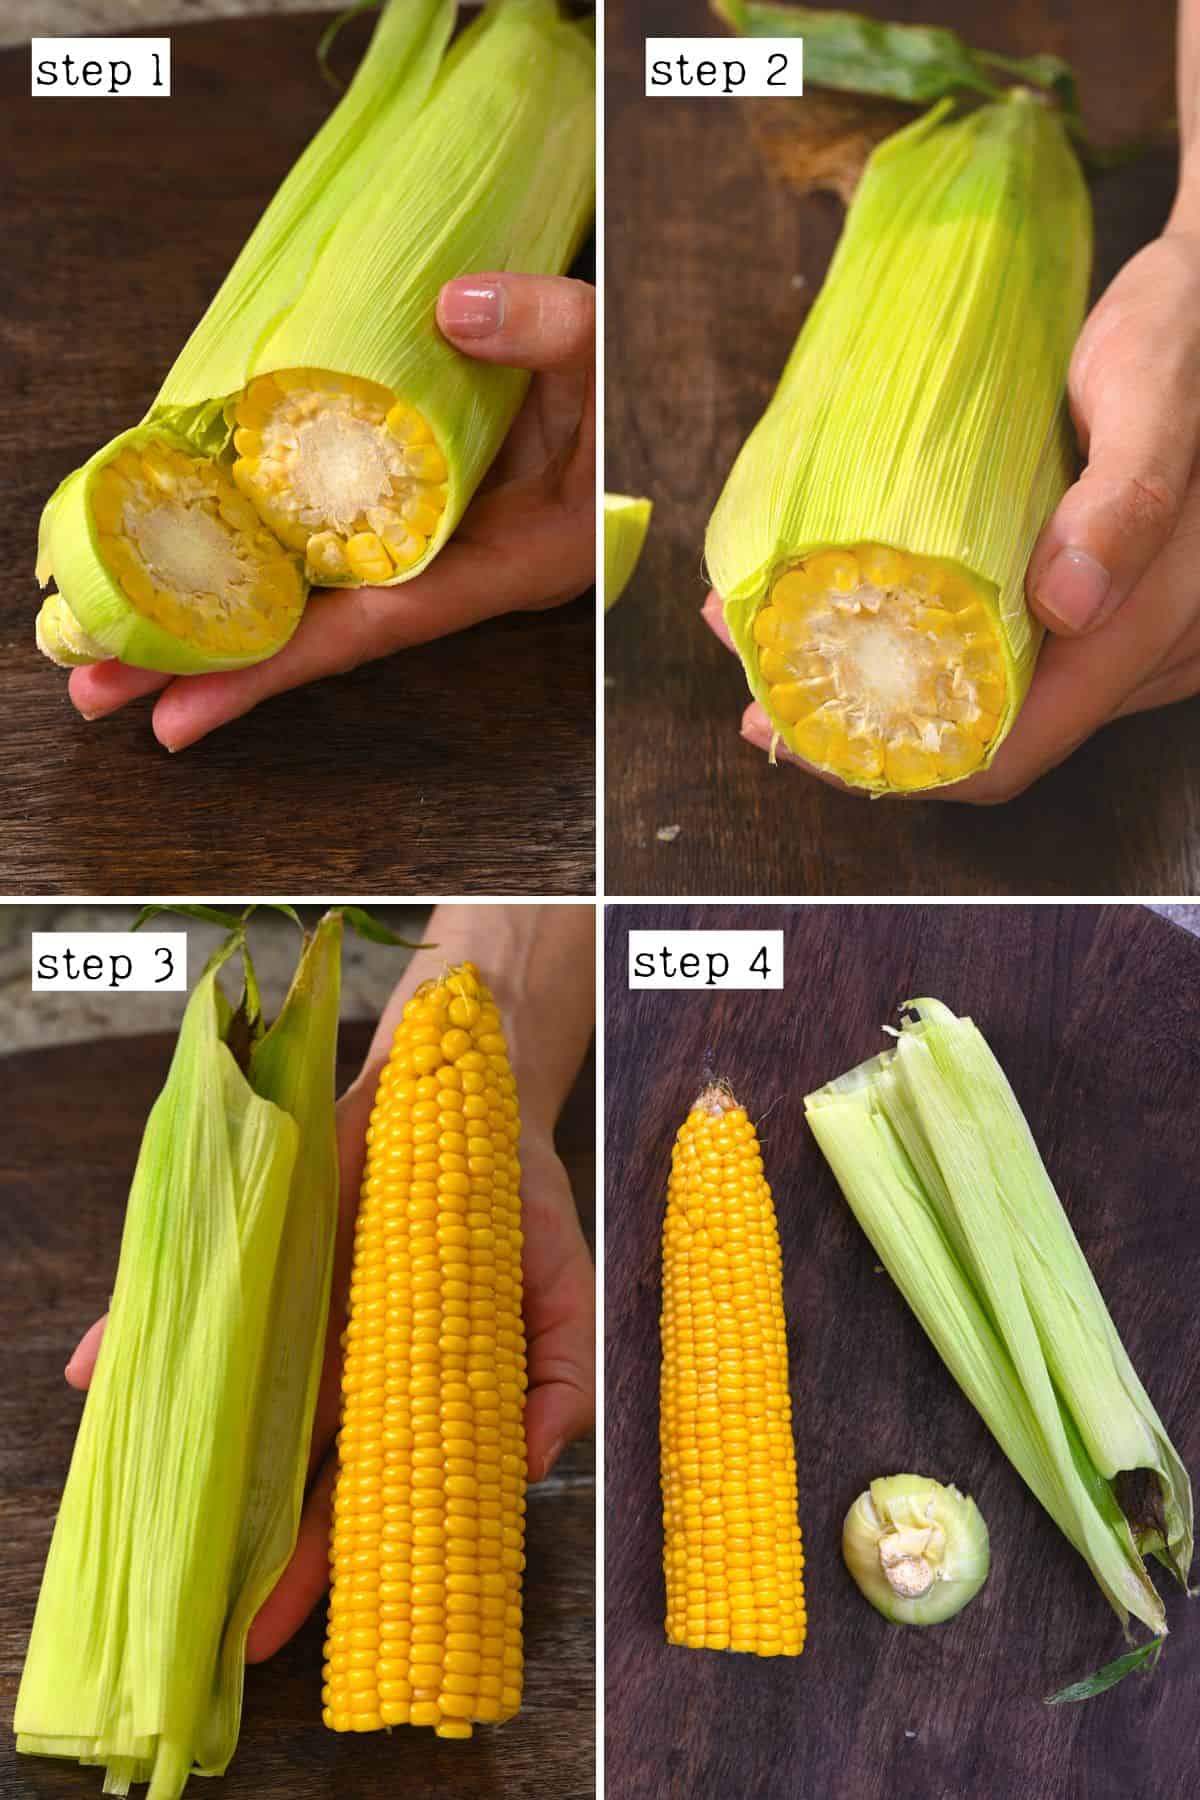 Steps for removing husk from corn on the cob